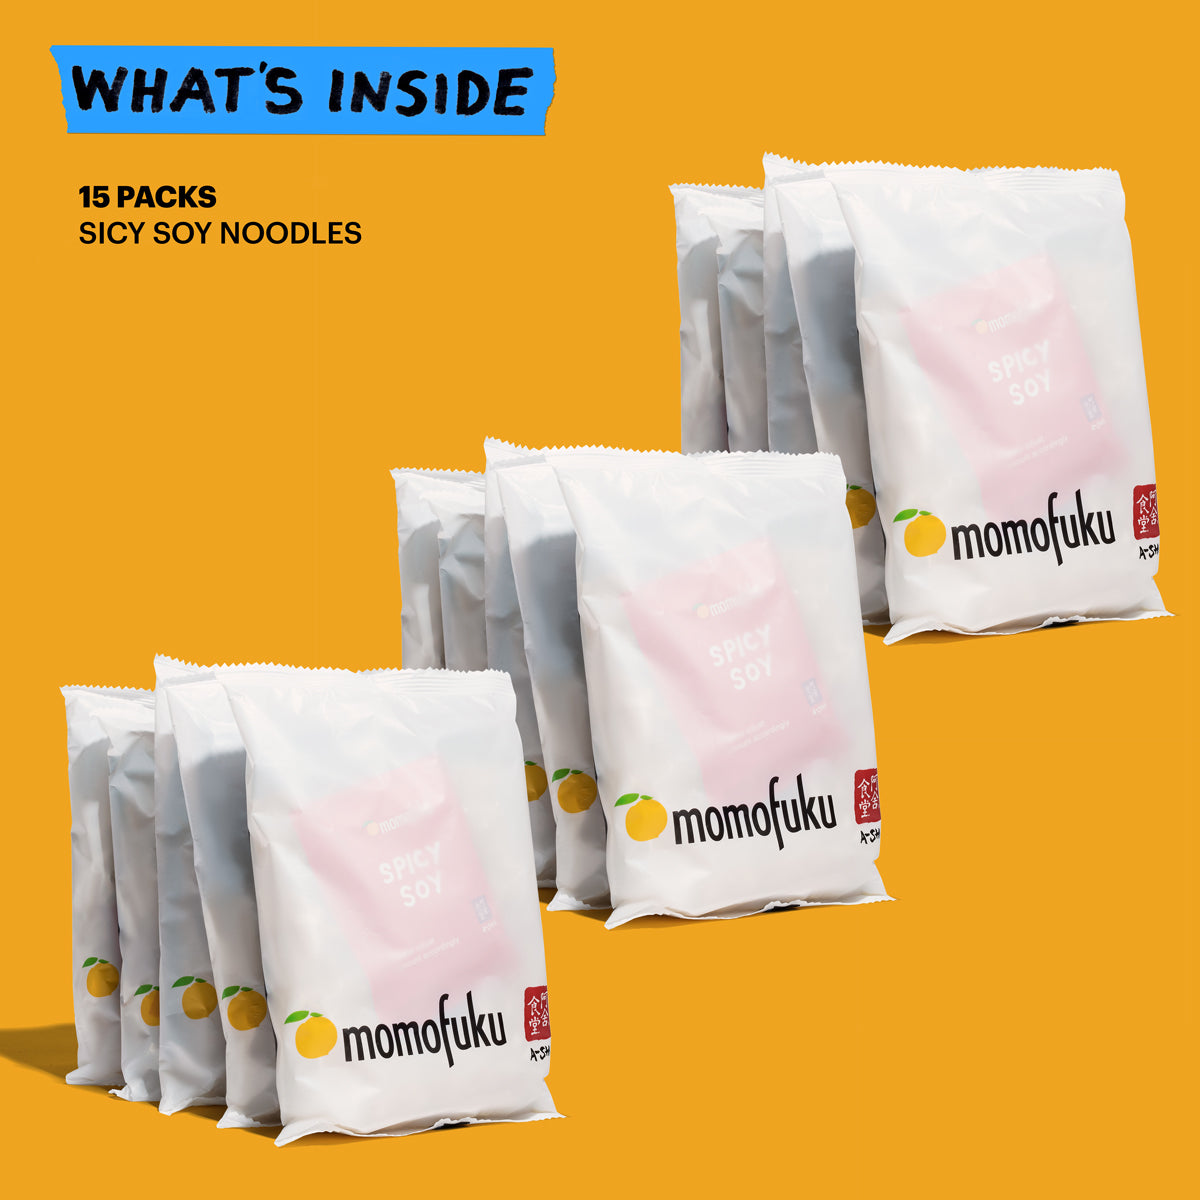 Whats inside: 15 single packs Spicy Soy Noodles